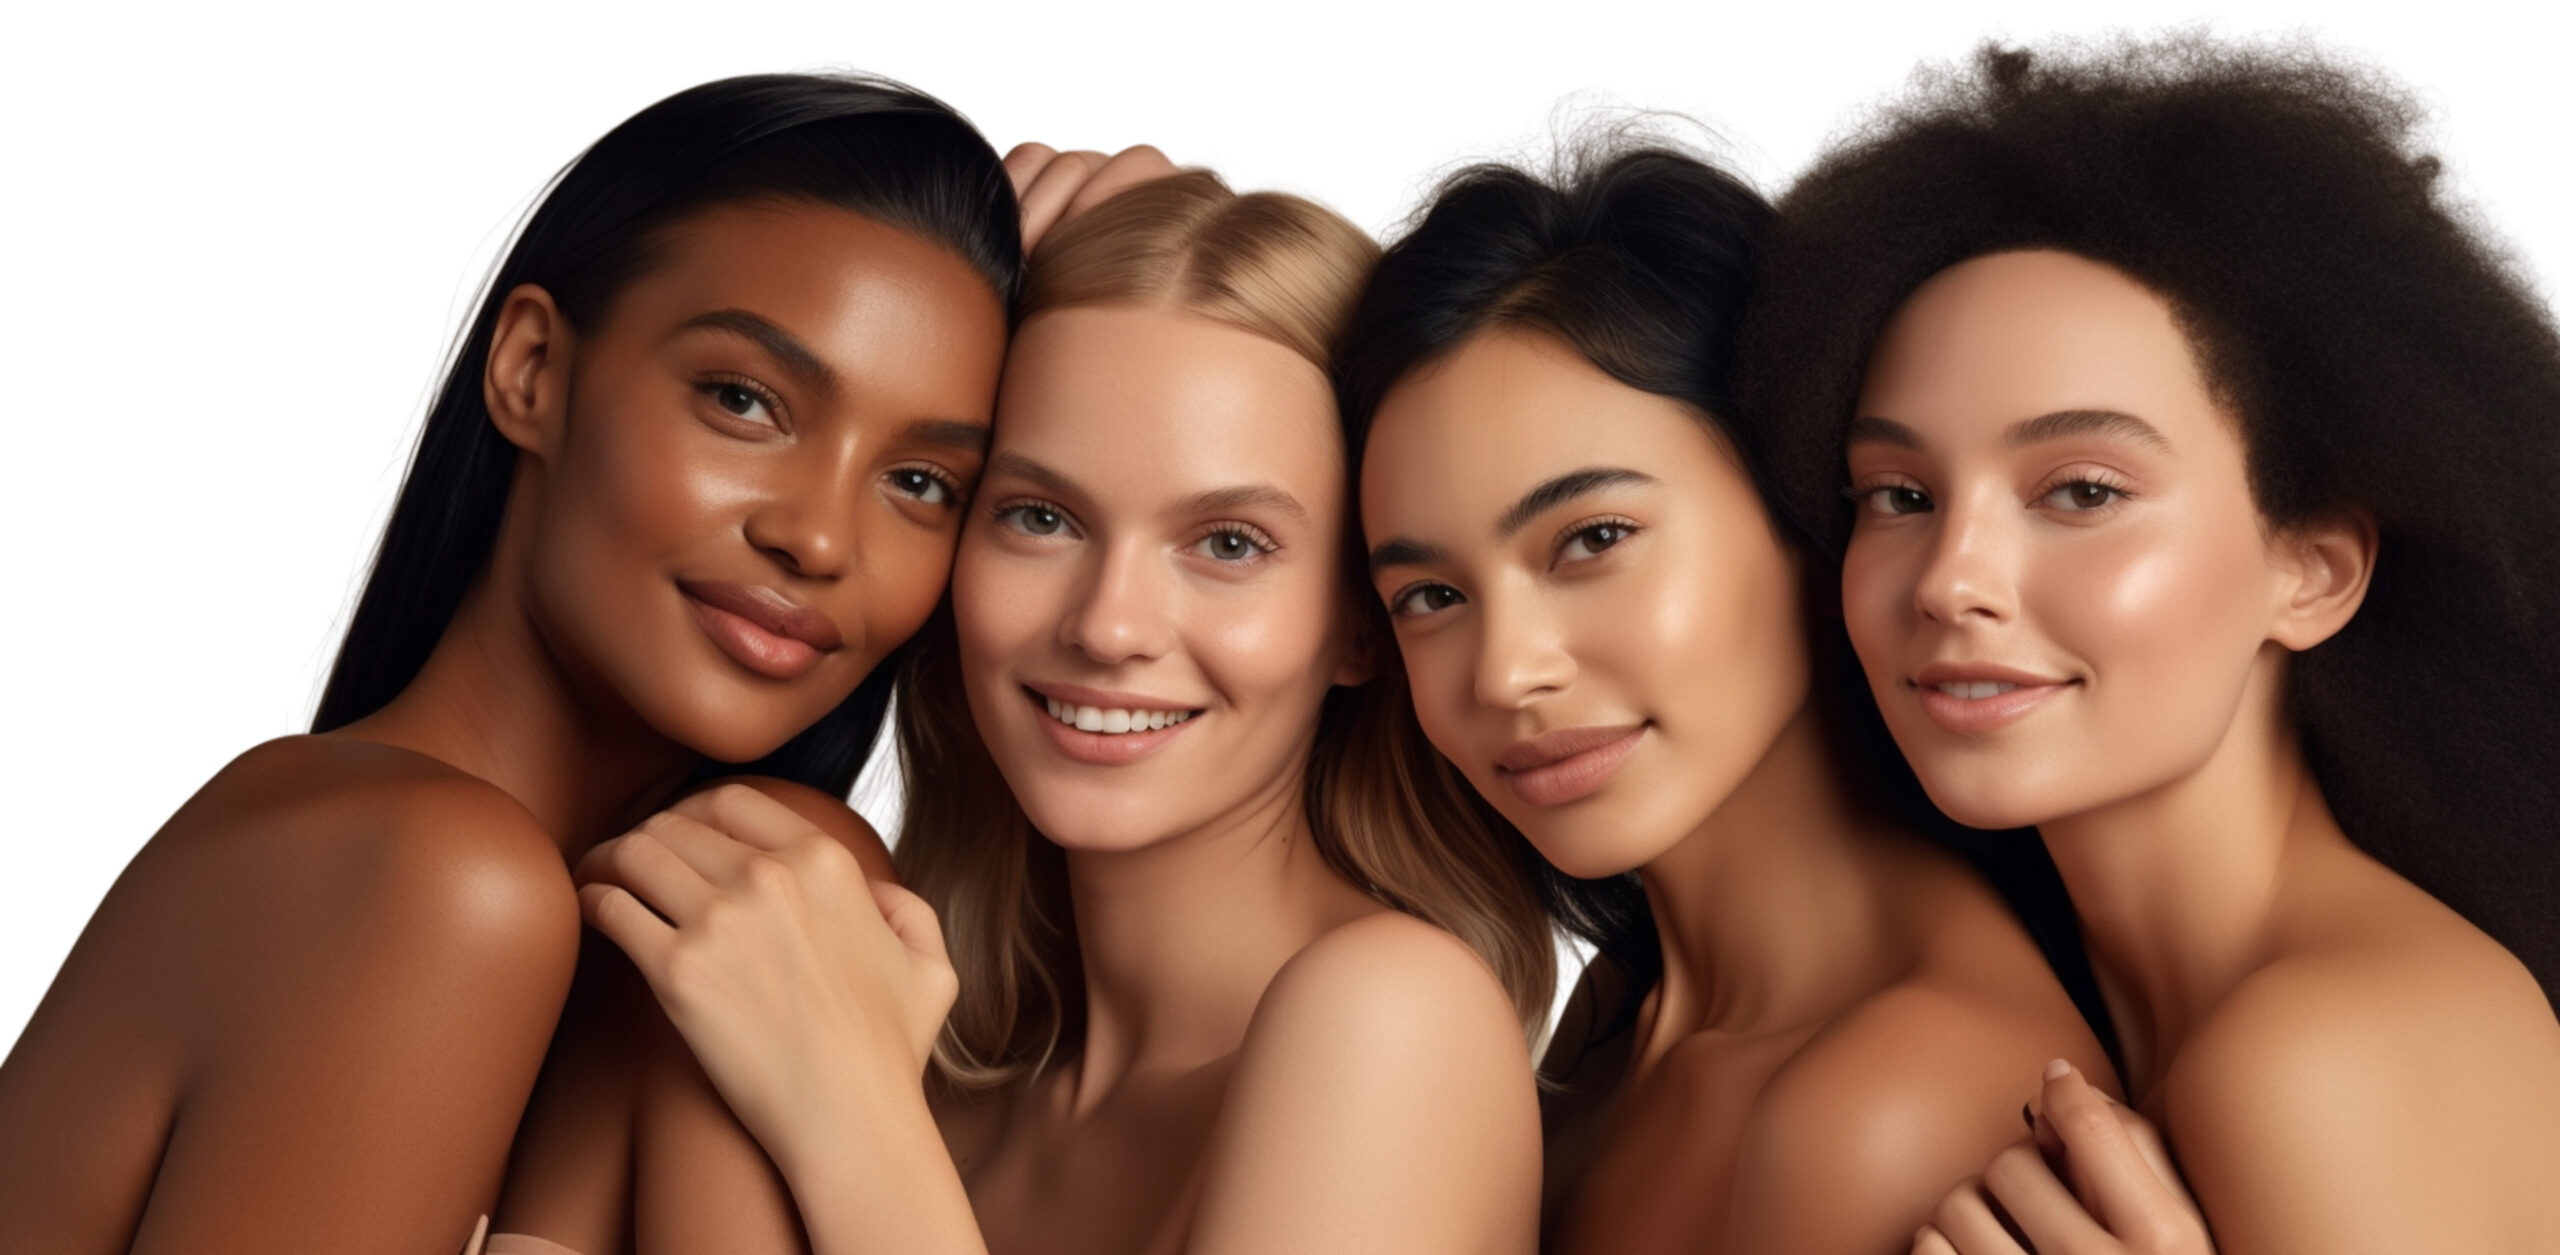 Four Beautiful women. Multi Ethnic Group of Womens with different types of skin together and looking on camera. Diverse ethnicity women - Caucasian, African and Asian posing and smiling against white background | Healthy Glow Medical in Orlando, FL